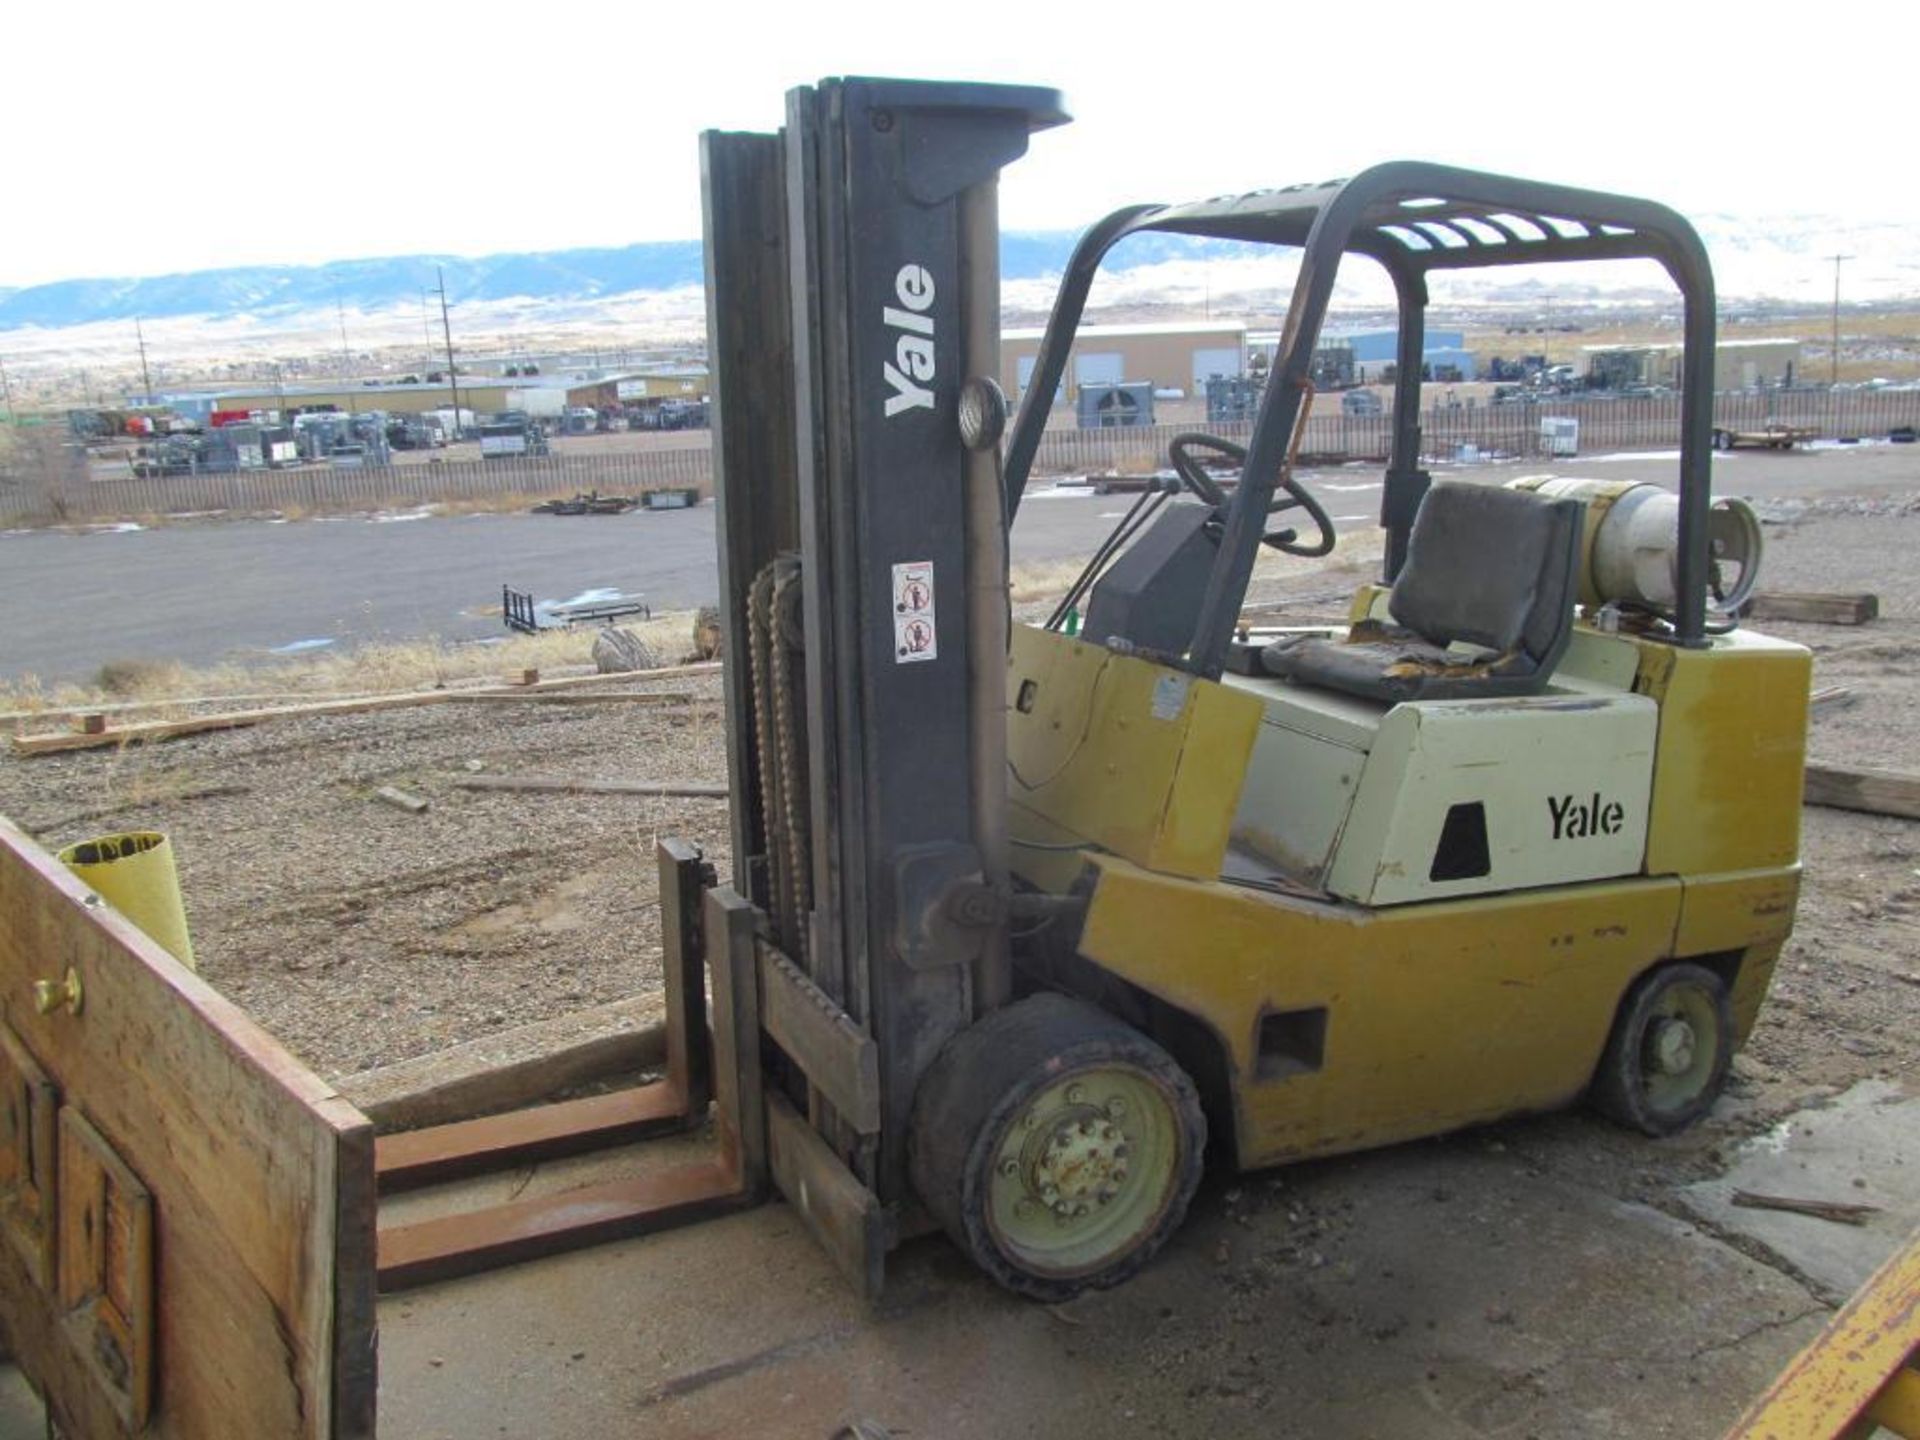 Yale GLC08LCJSBE085 8,000-Lb LPG Forklift, S/N 11404689, 185" Lift, 60" Forks, Needs Repairs